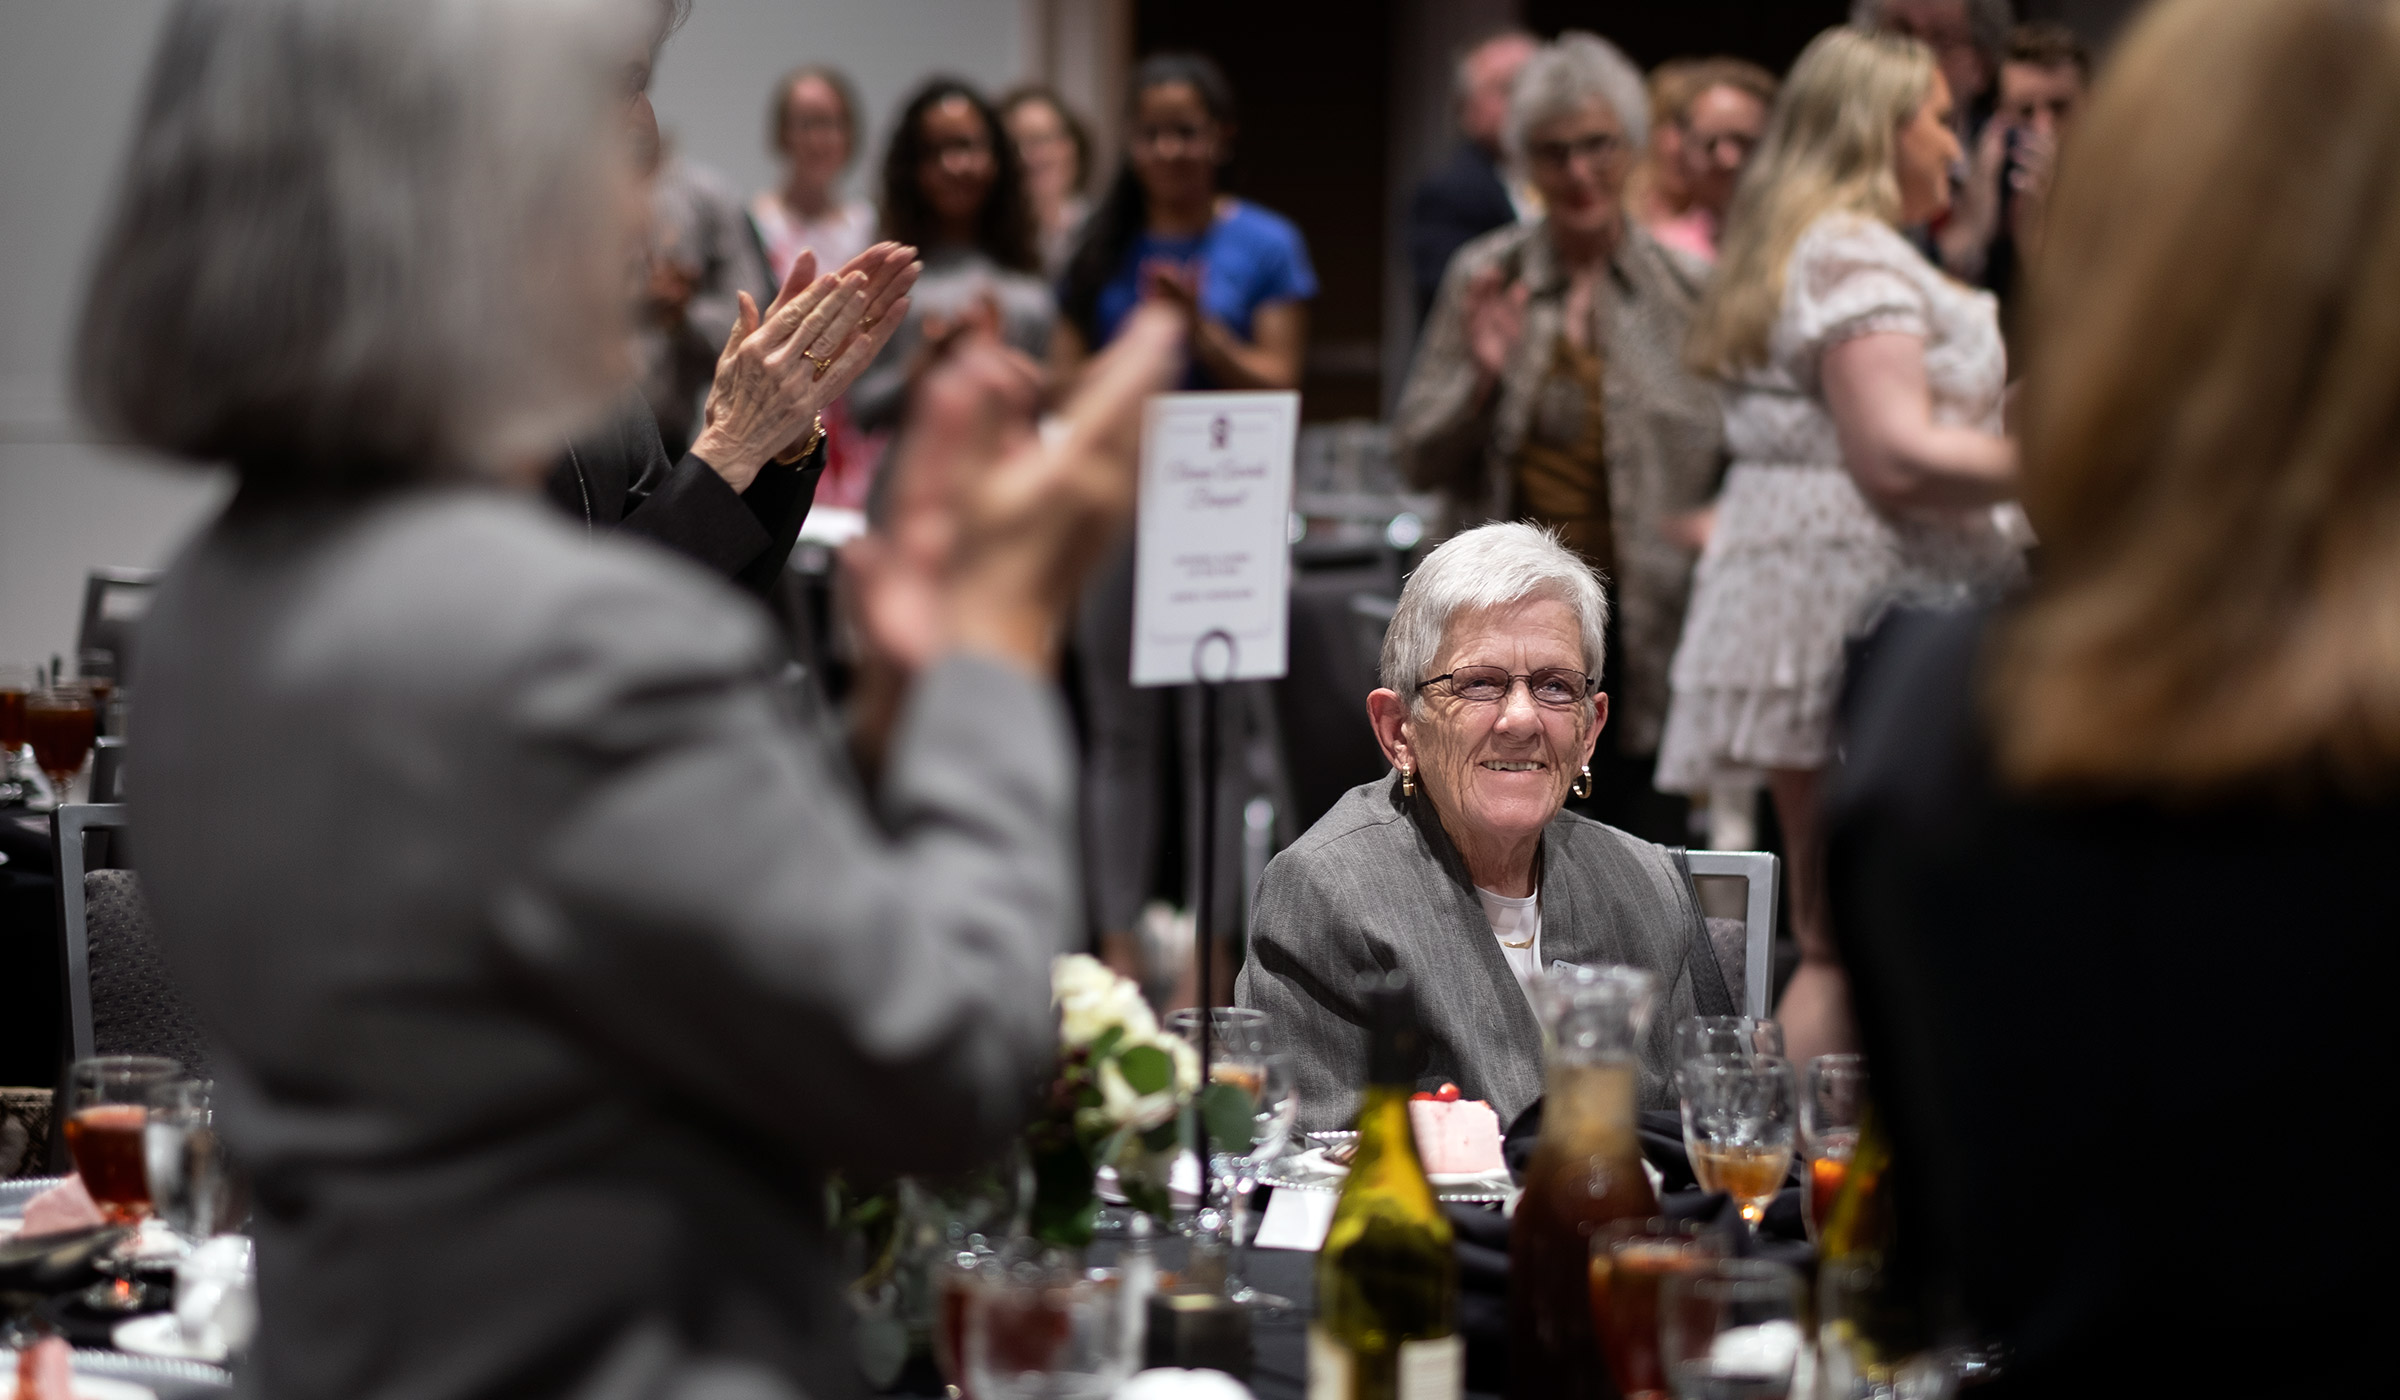 National Alumna of the Year, Janice Nicholson smiles while seated, as award banquet attendees stand and applaud her.